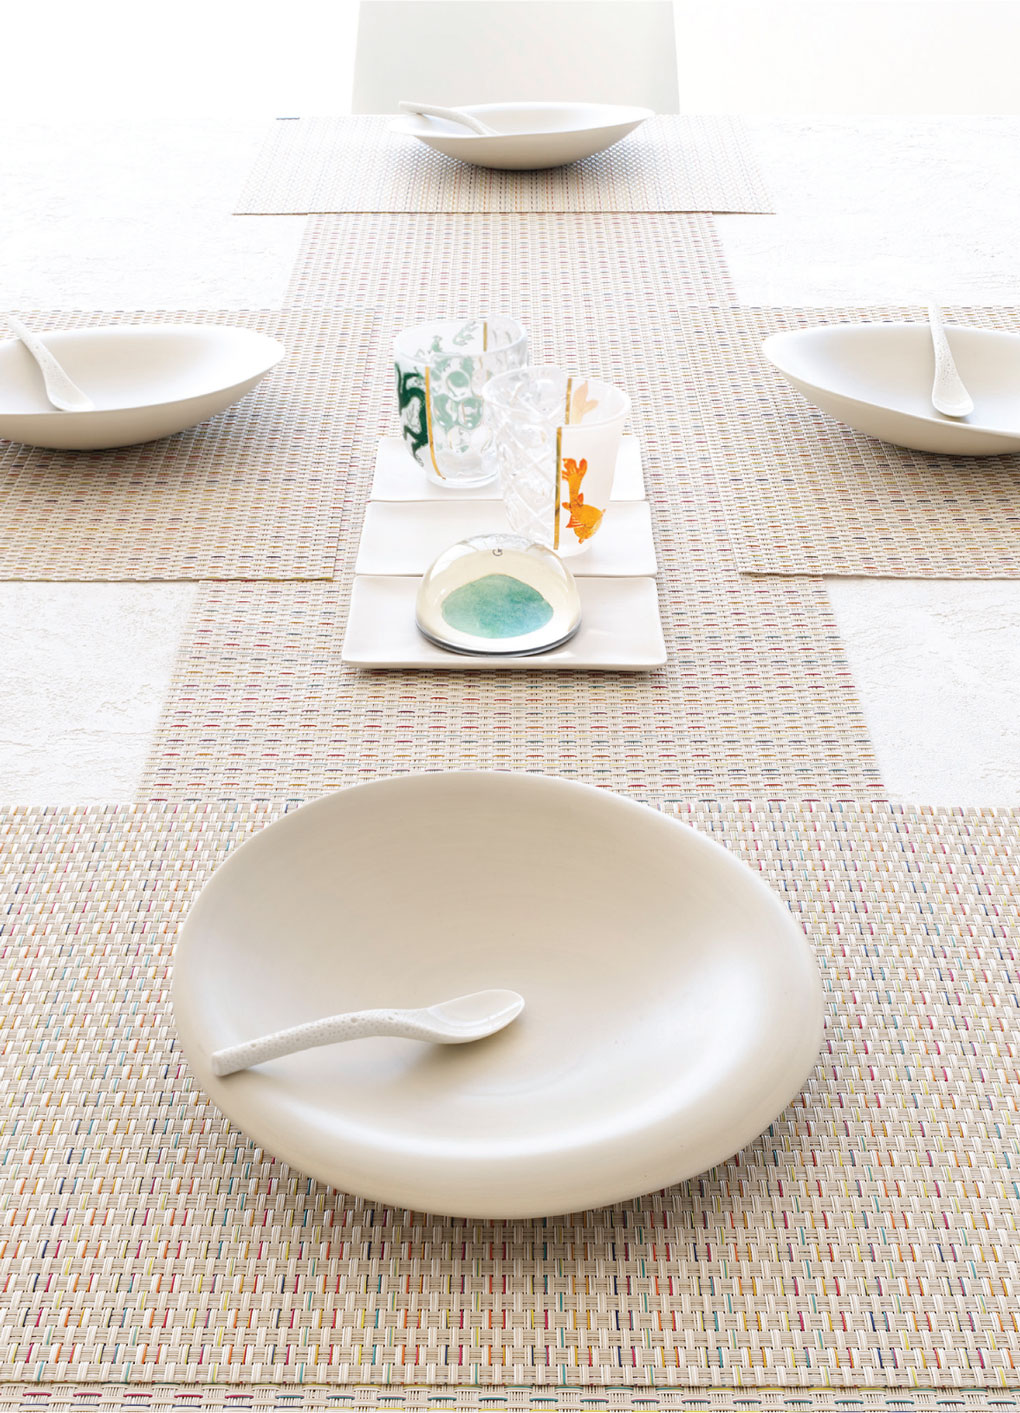 Table settings from Chilewich